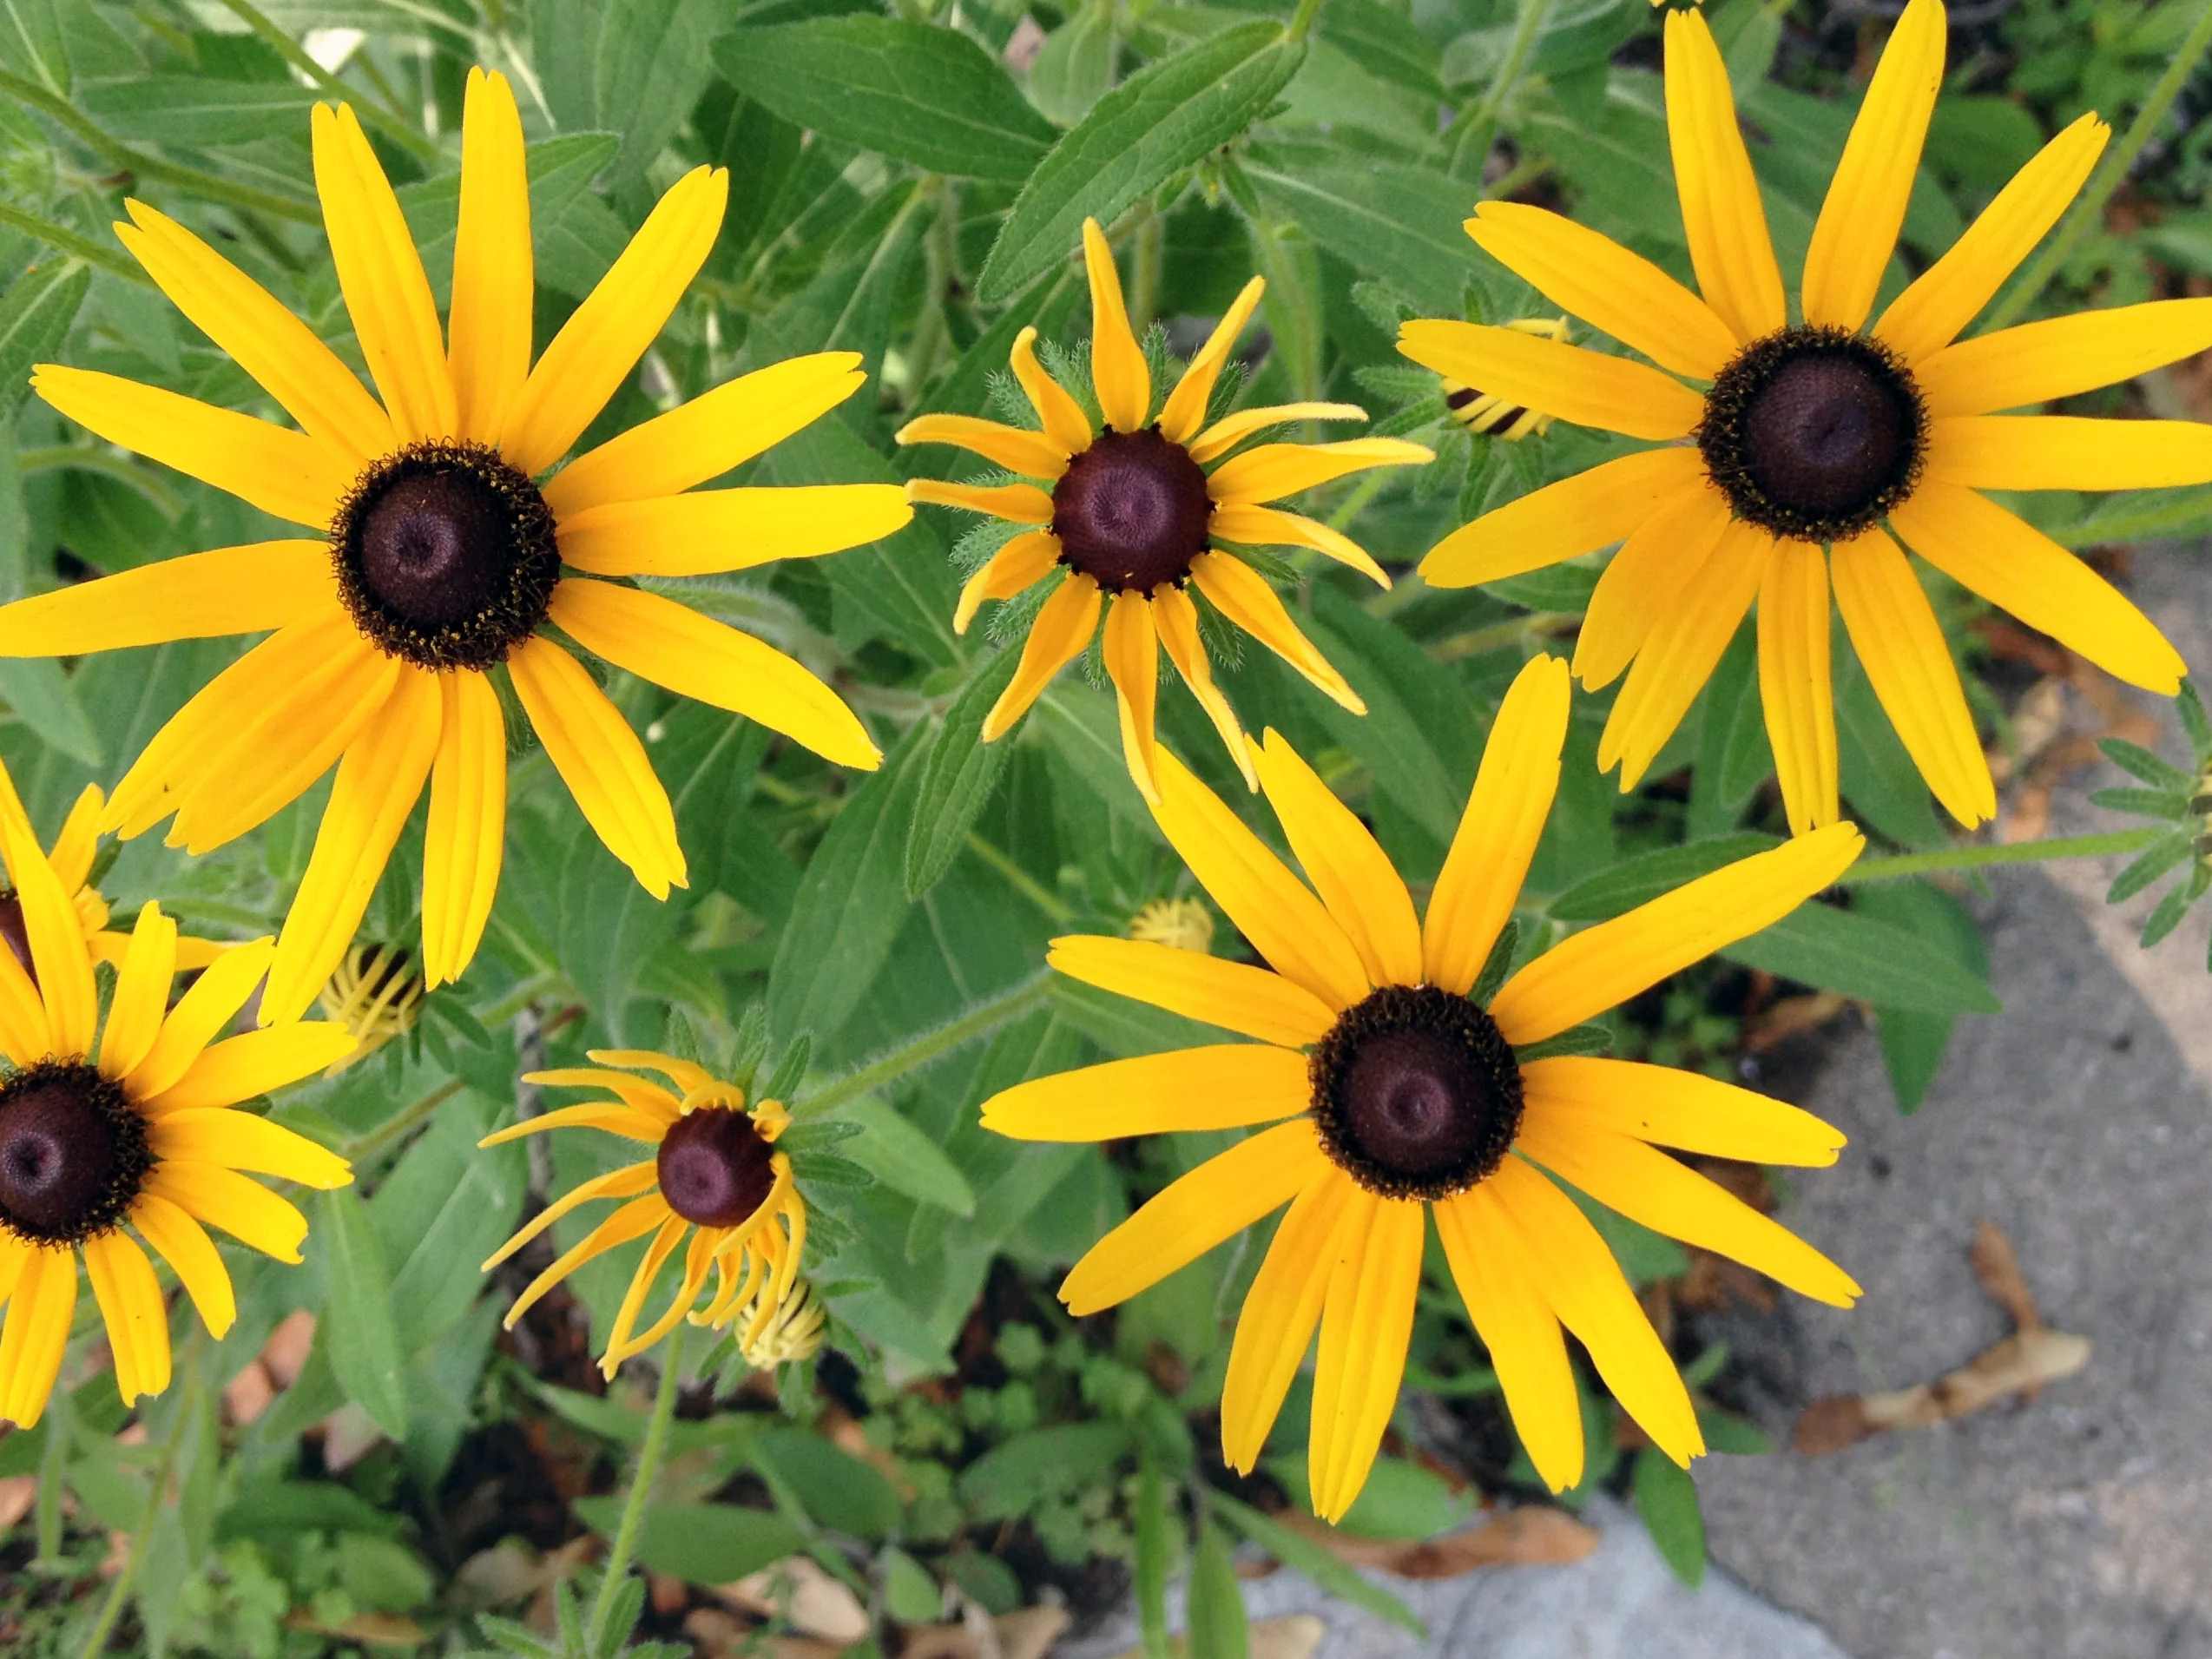 How To Plant Black Eyed Susan Seeds